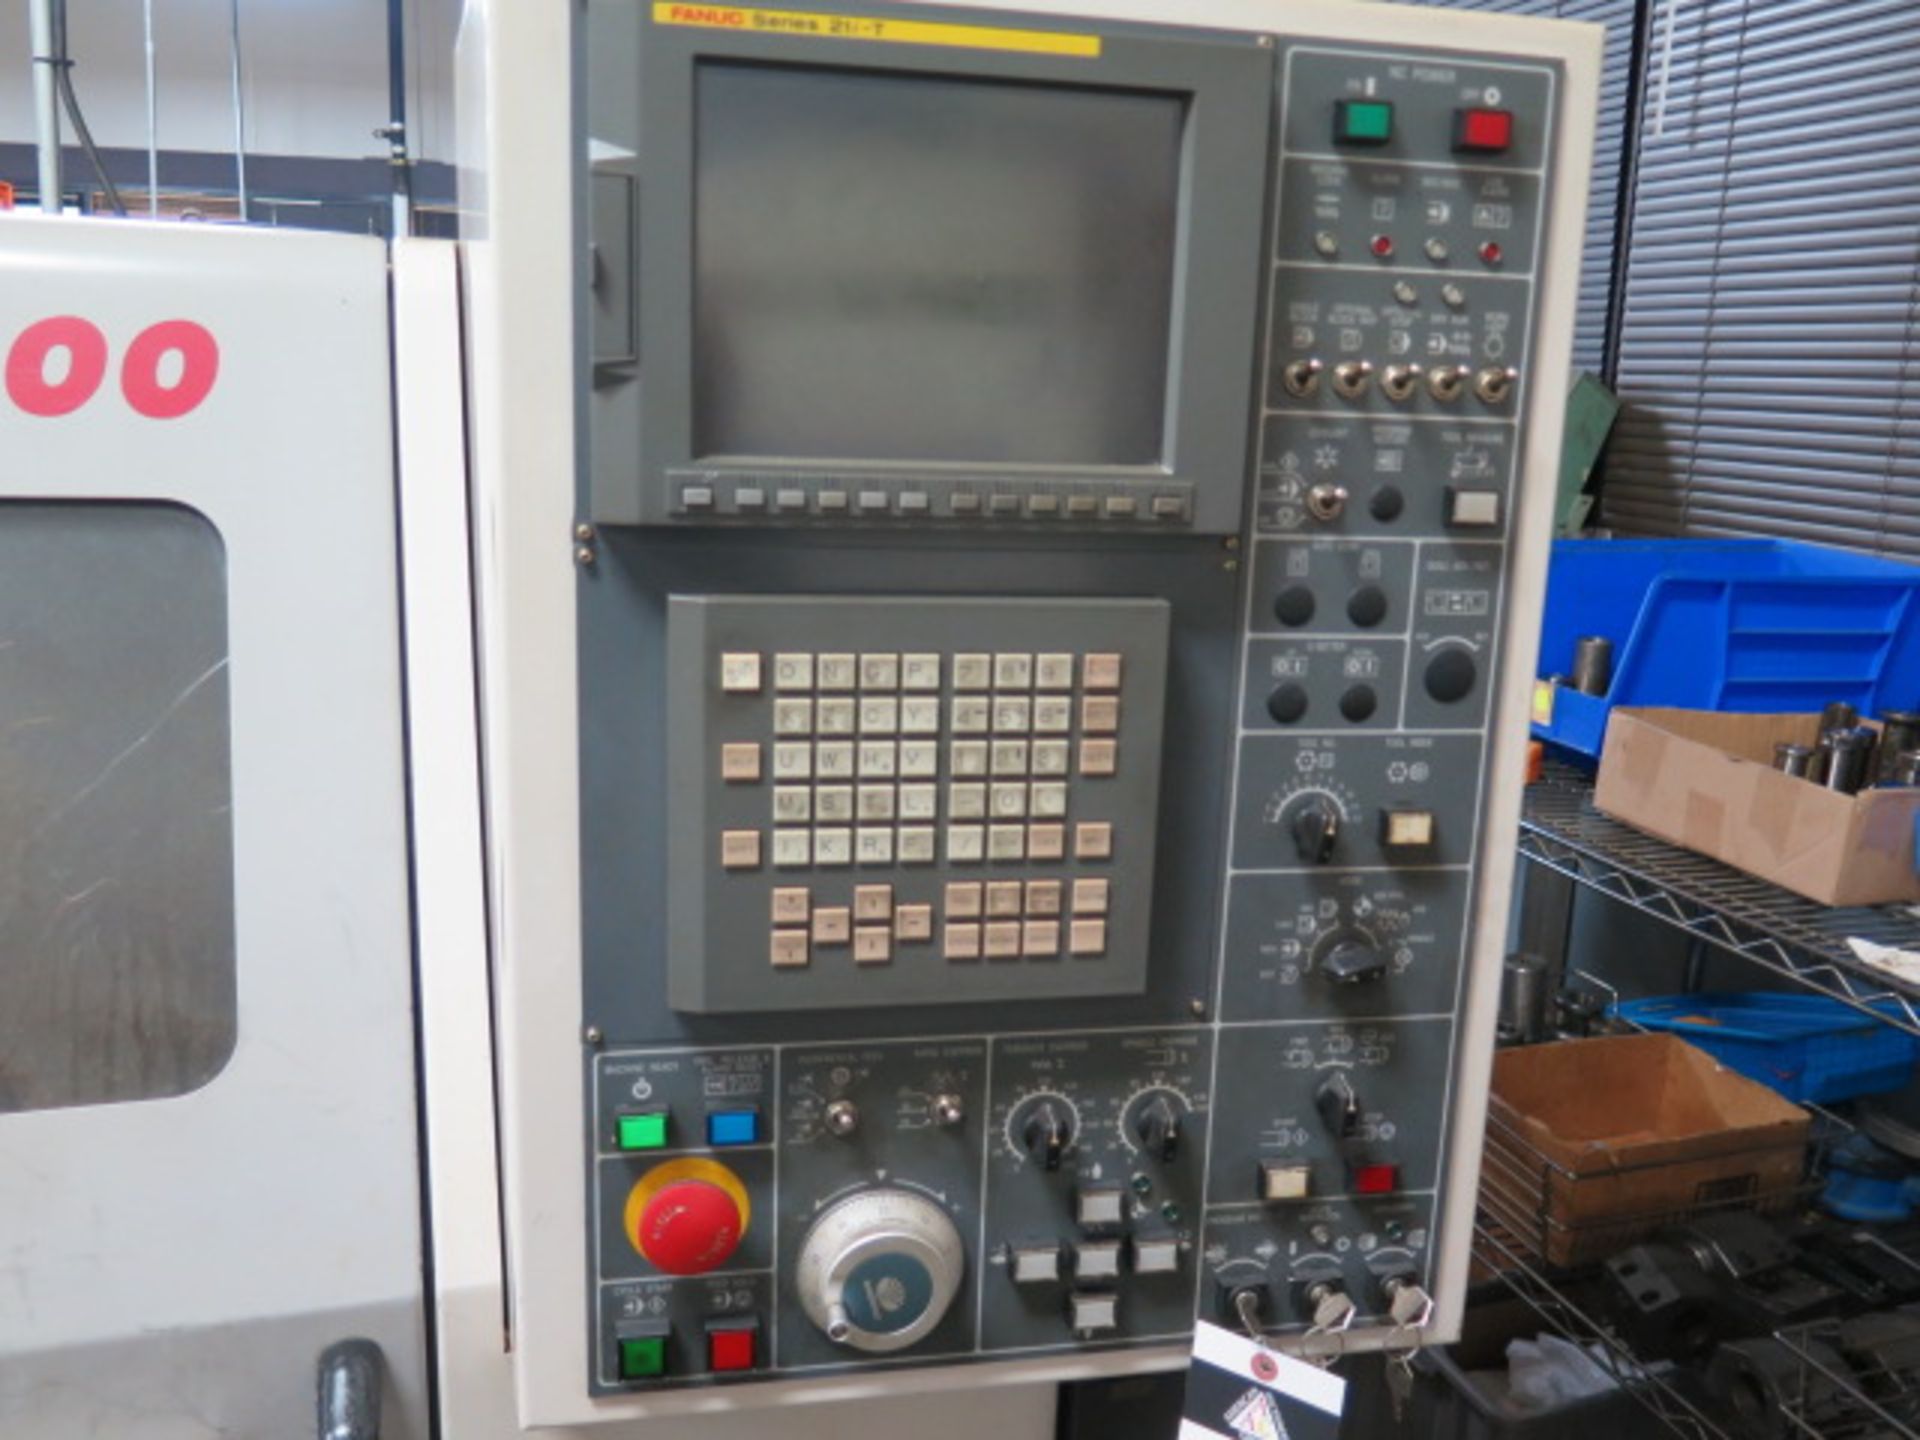 2000 Daewoo LYNX 200B CNC Turning Center s/n L2001751 w/ Fanuc Series 21i-T Controls, SOLD AS IS - Image 11 of 14